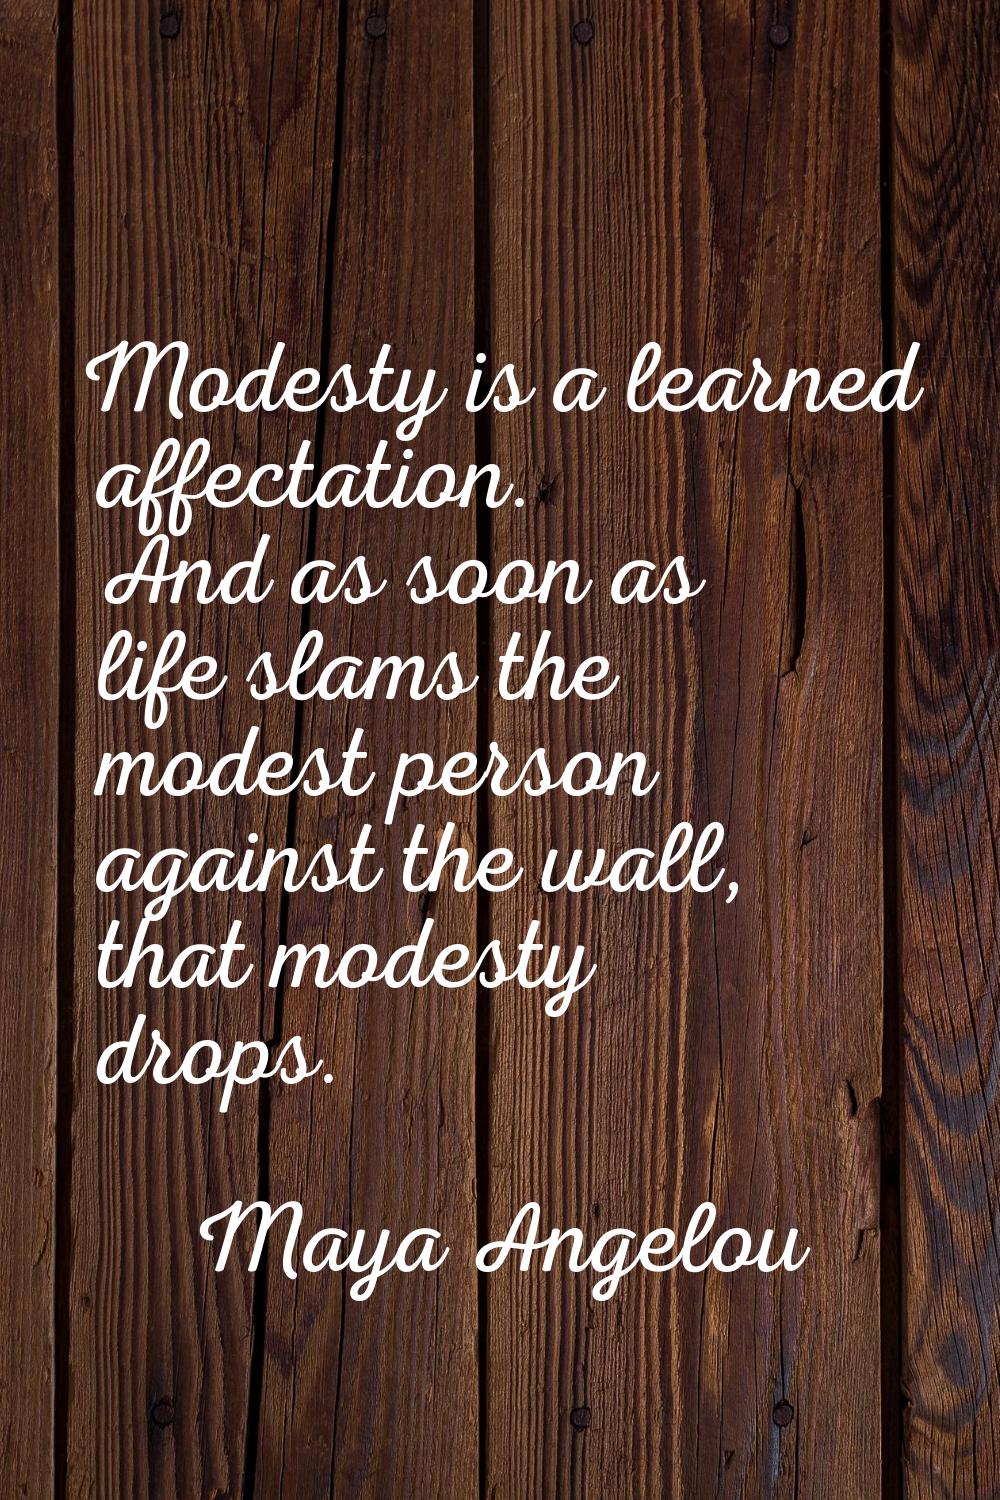 Modesty is a learned affectation. And as soon as life slams the modest person against the wall, tha